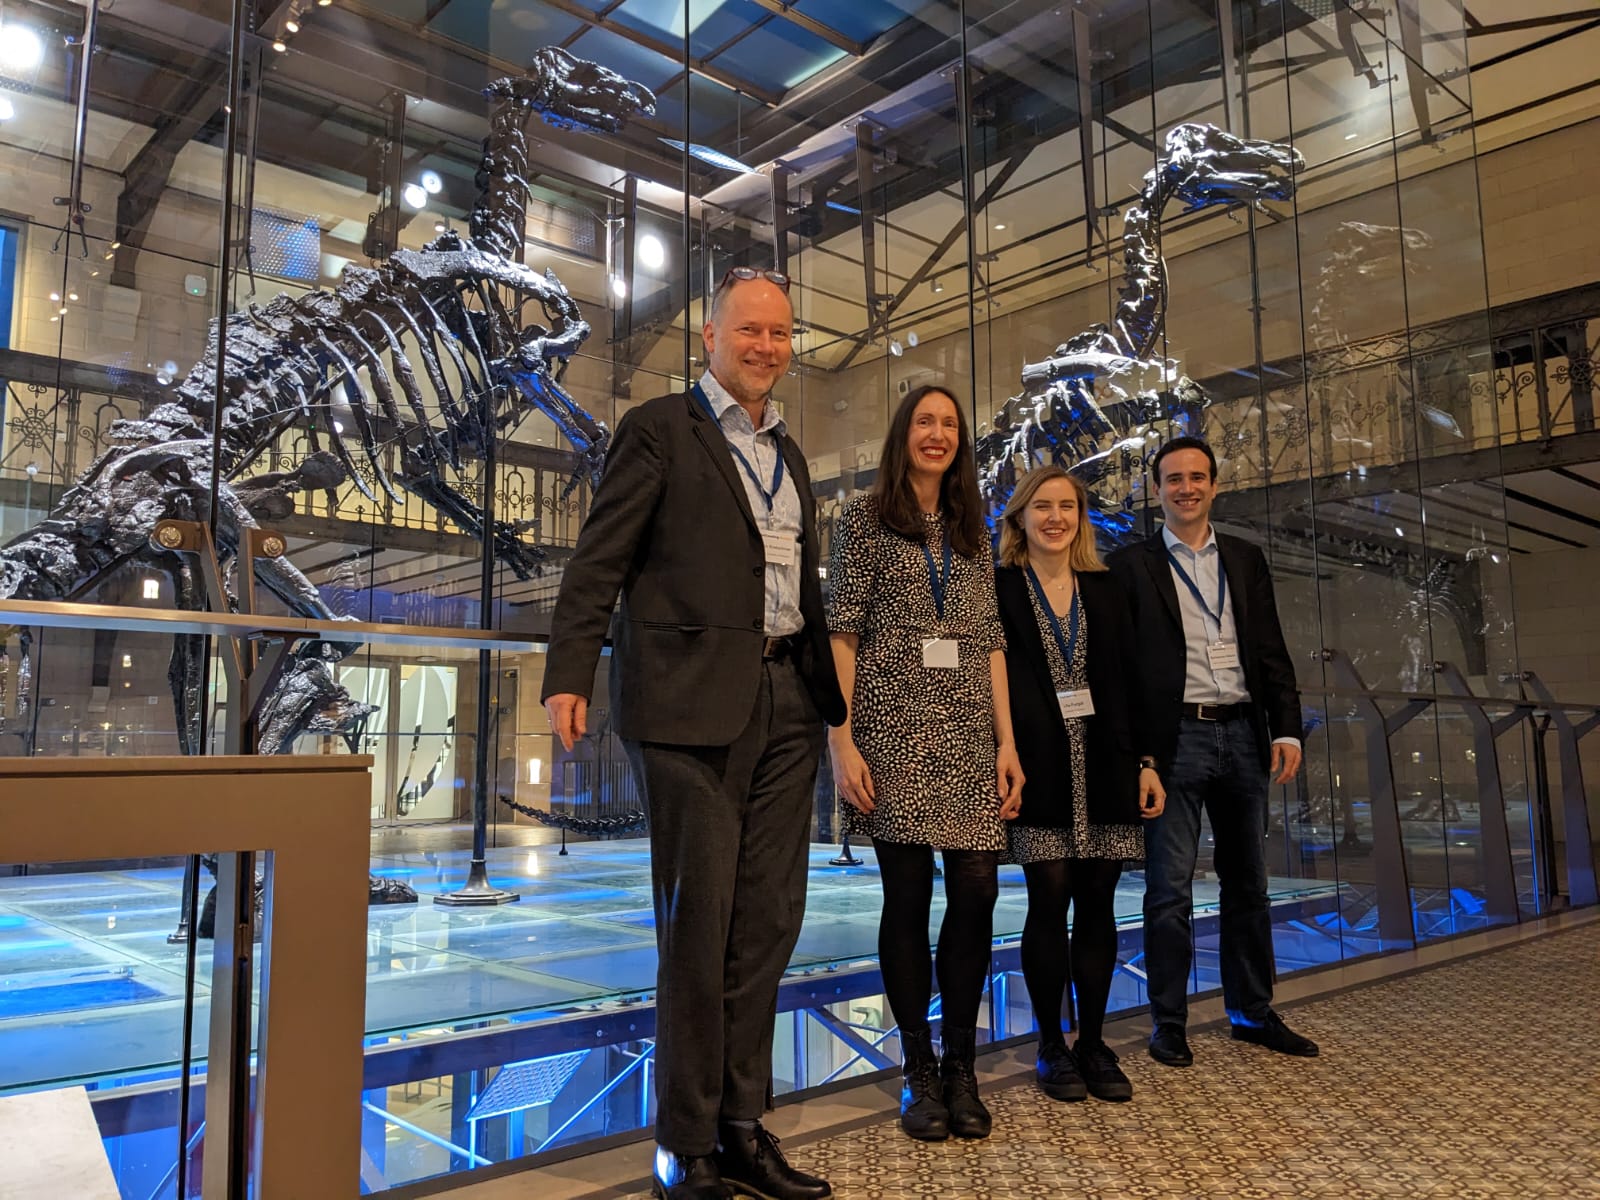 Four people standing in a row in front of a dinosaur skeleton exhibit.